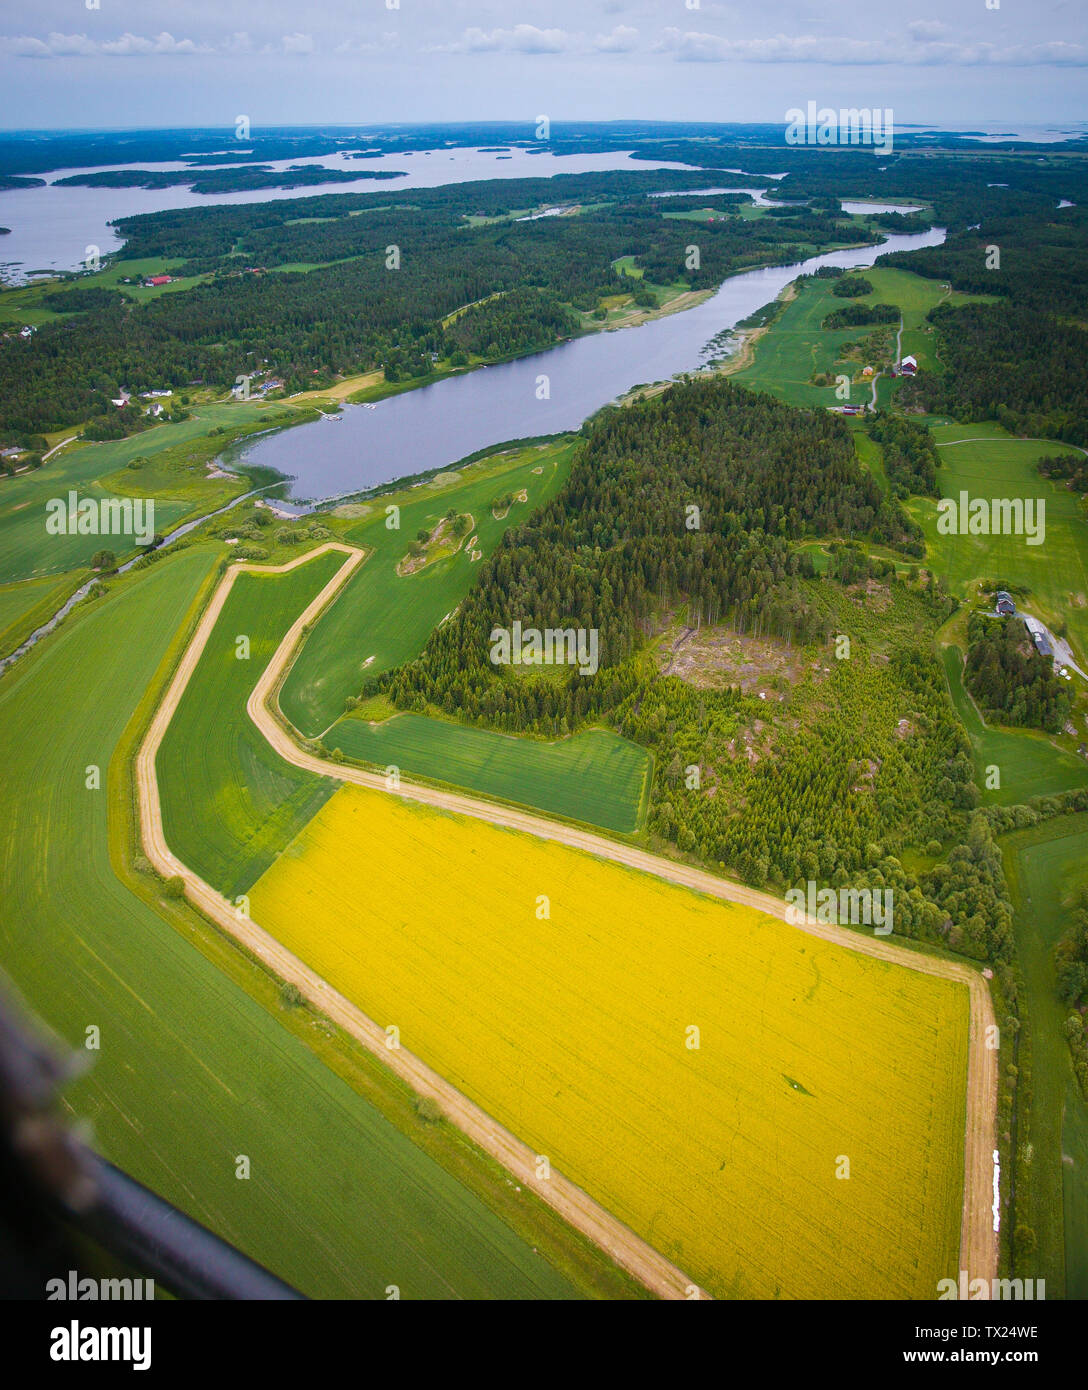 Aerial view over a part of the lake Vansjø and agricultural fields in Østfold, Norway, Scandinavia. Just above the center is the fjord Grepperødfjorden, and behind it is the open water area called Storefjorden. In the foreground is a field of mustard rapeseed. Vansjø is the largest lake in Østfold. The lake Vansjø and its surrounding lakes and rivers are a part of the water system called Morsavassdraget. The view is towards the southeast. June, 2006. Stock Photo